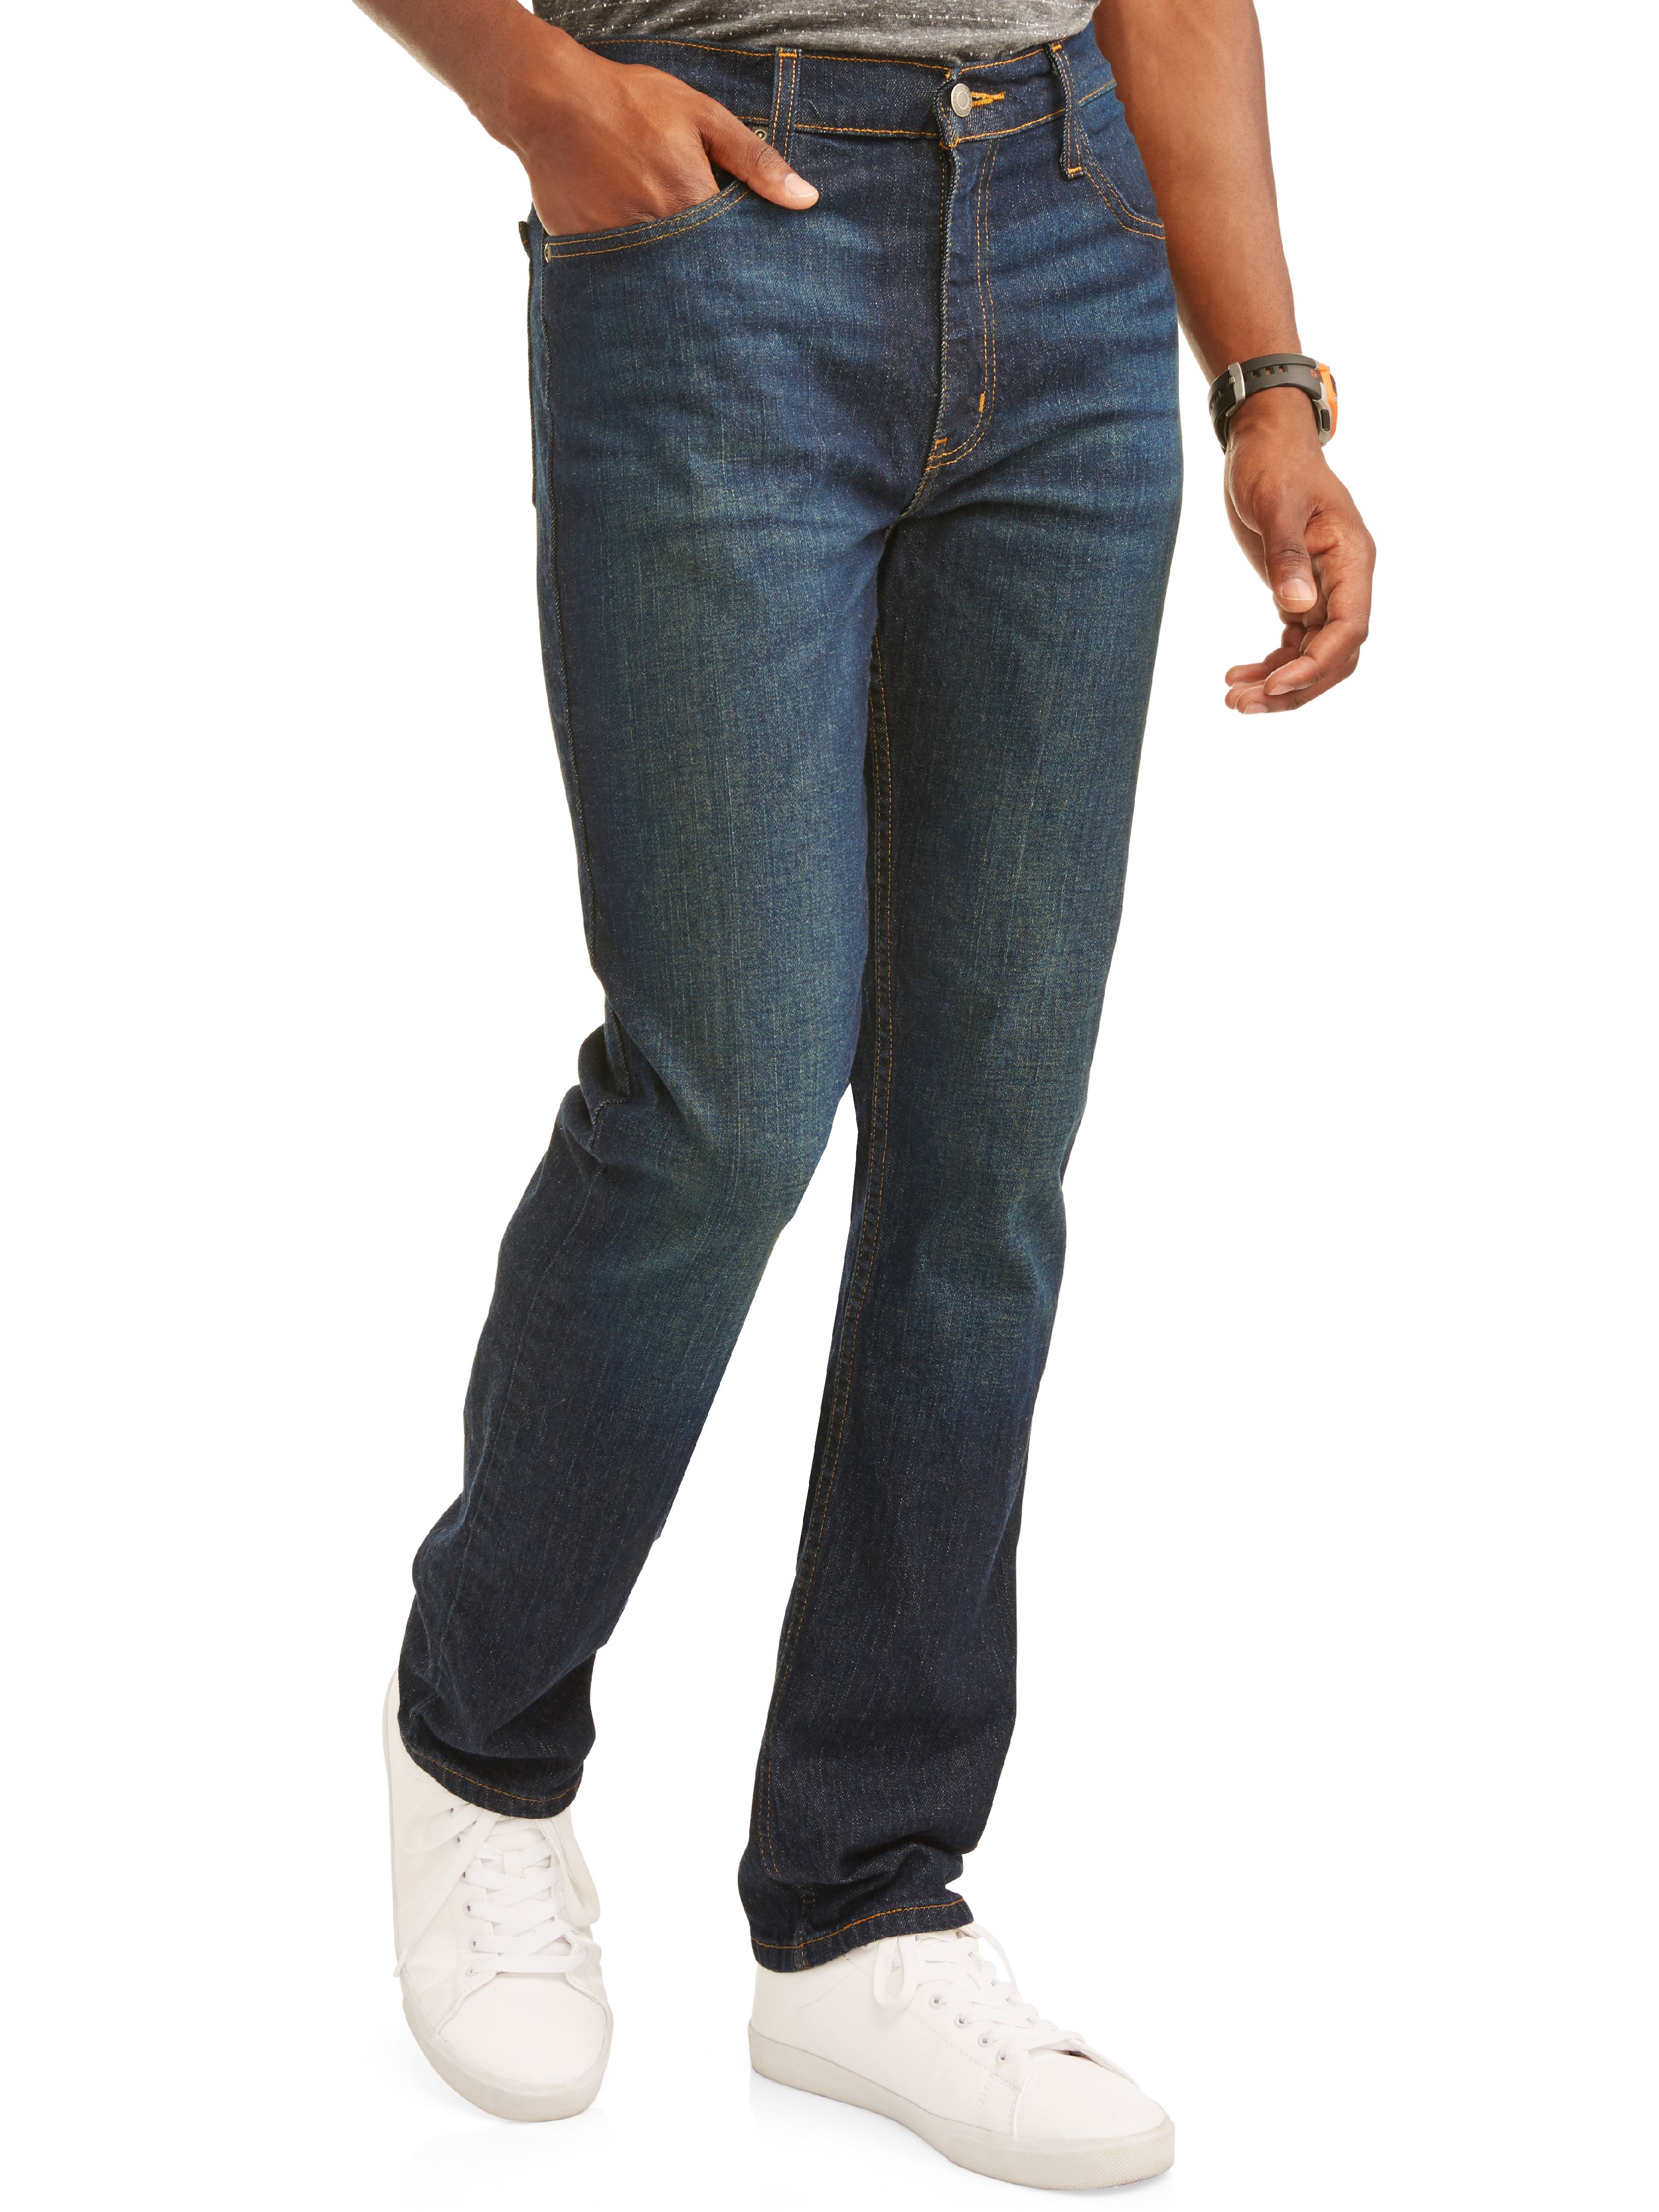 George Men's Straight Fit Jeans - image 2 of 5